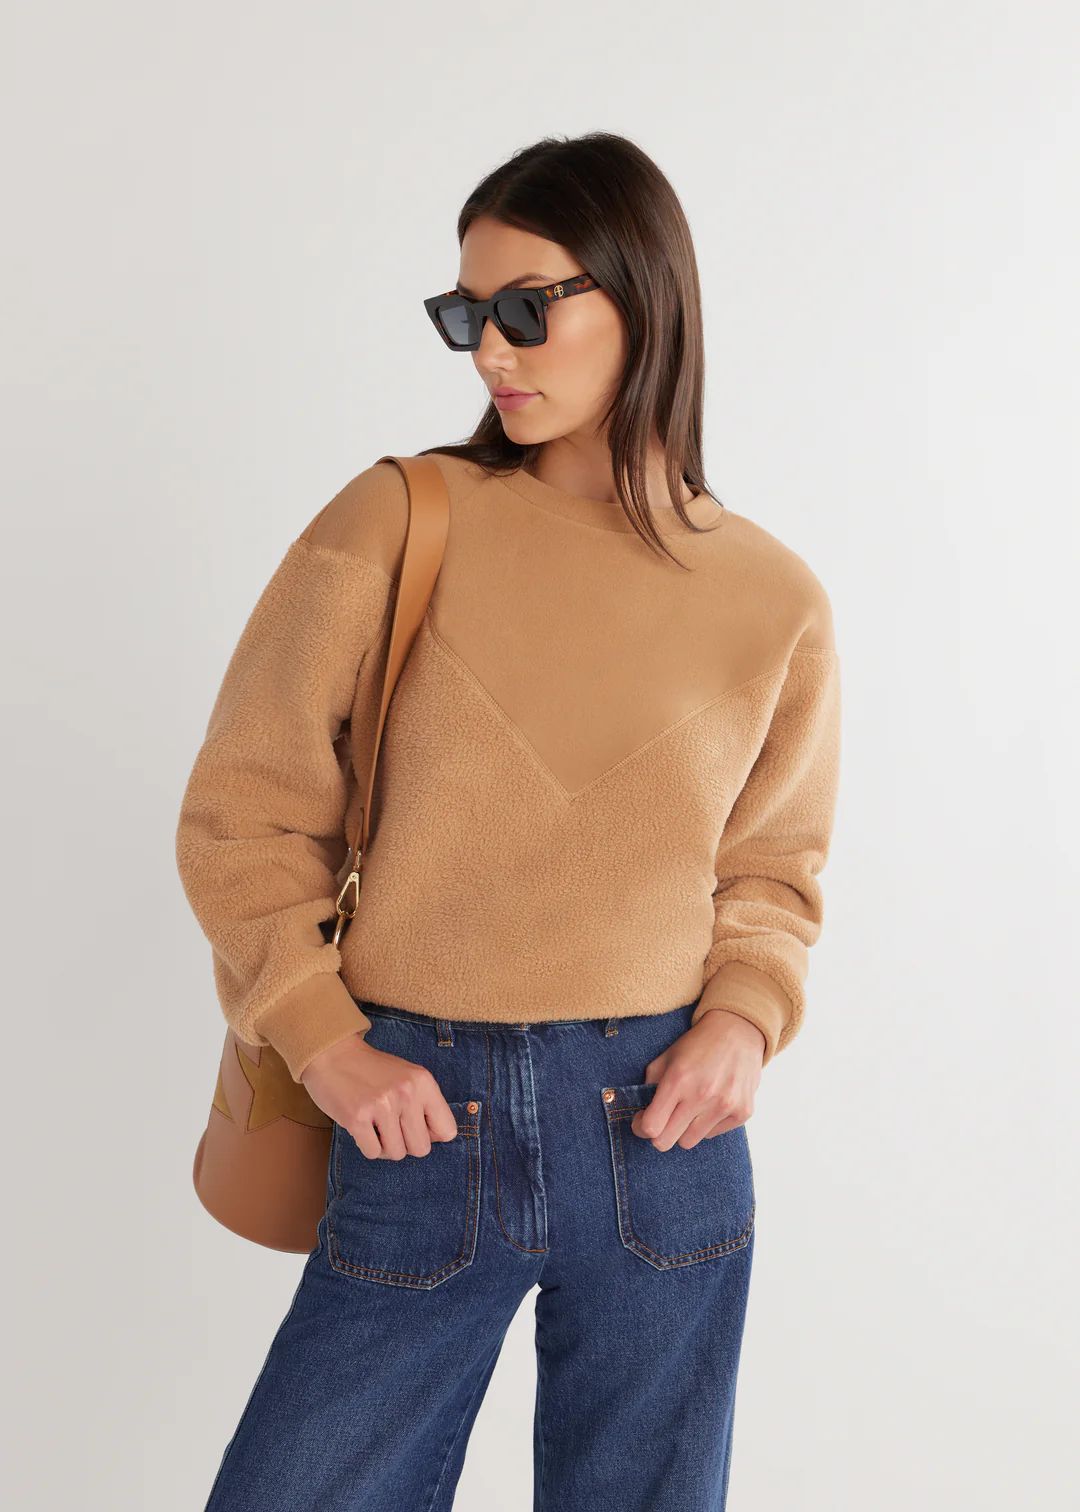 Saratoga Pullover in Sherpa Fleece (Camel) | Dudley Stephens